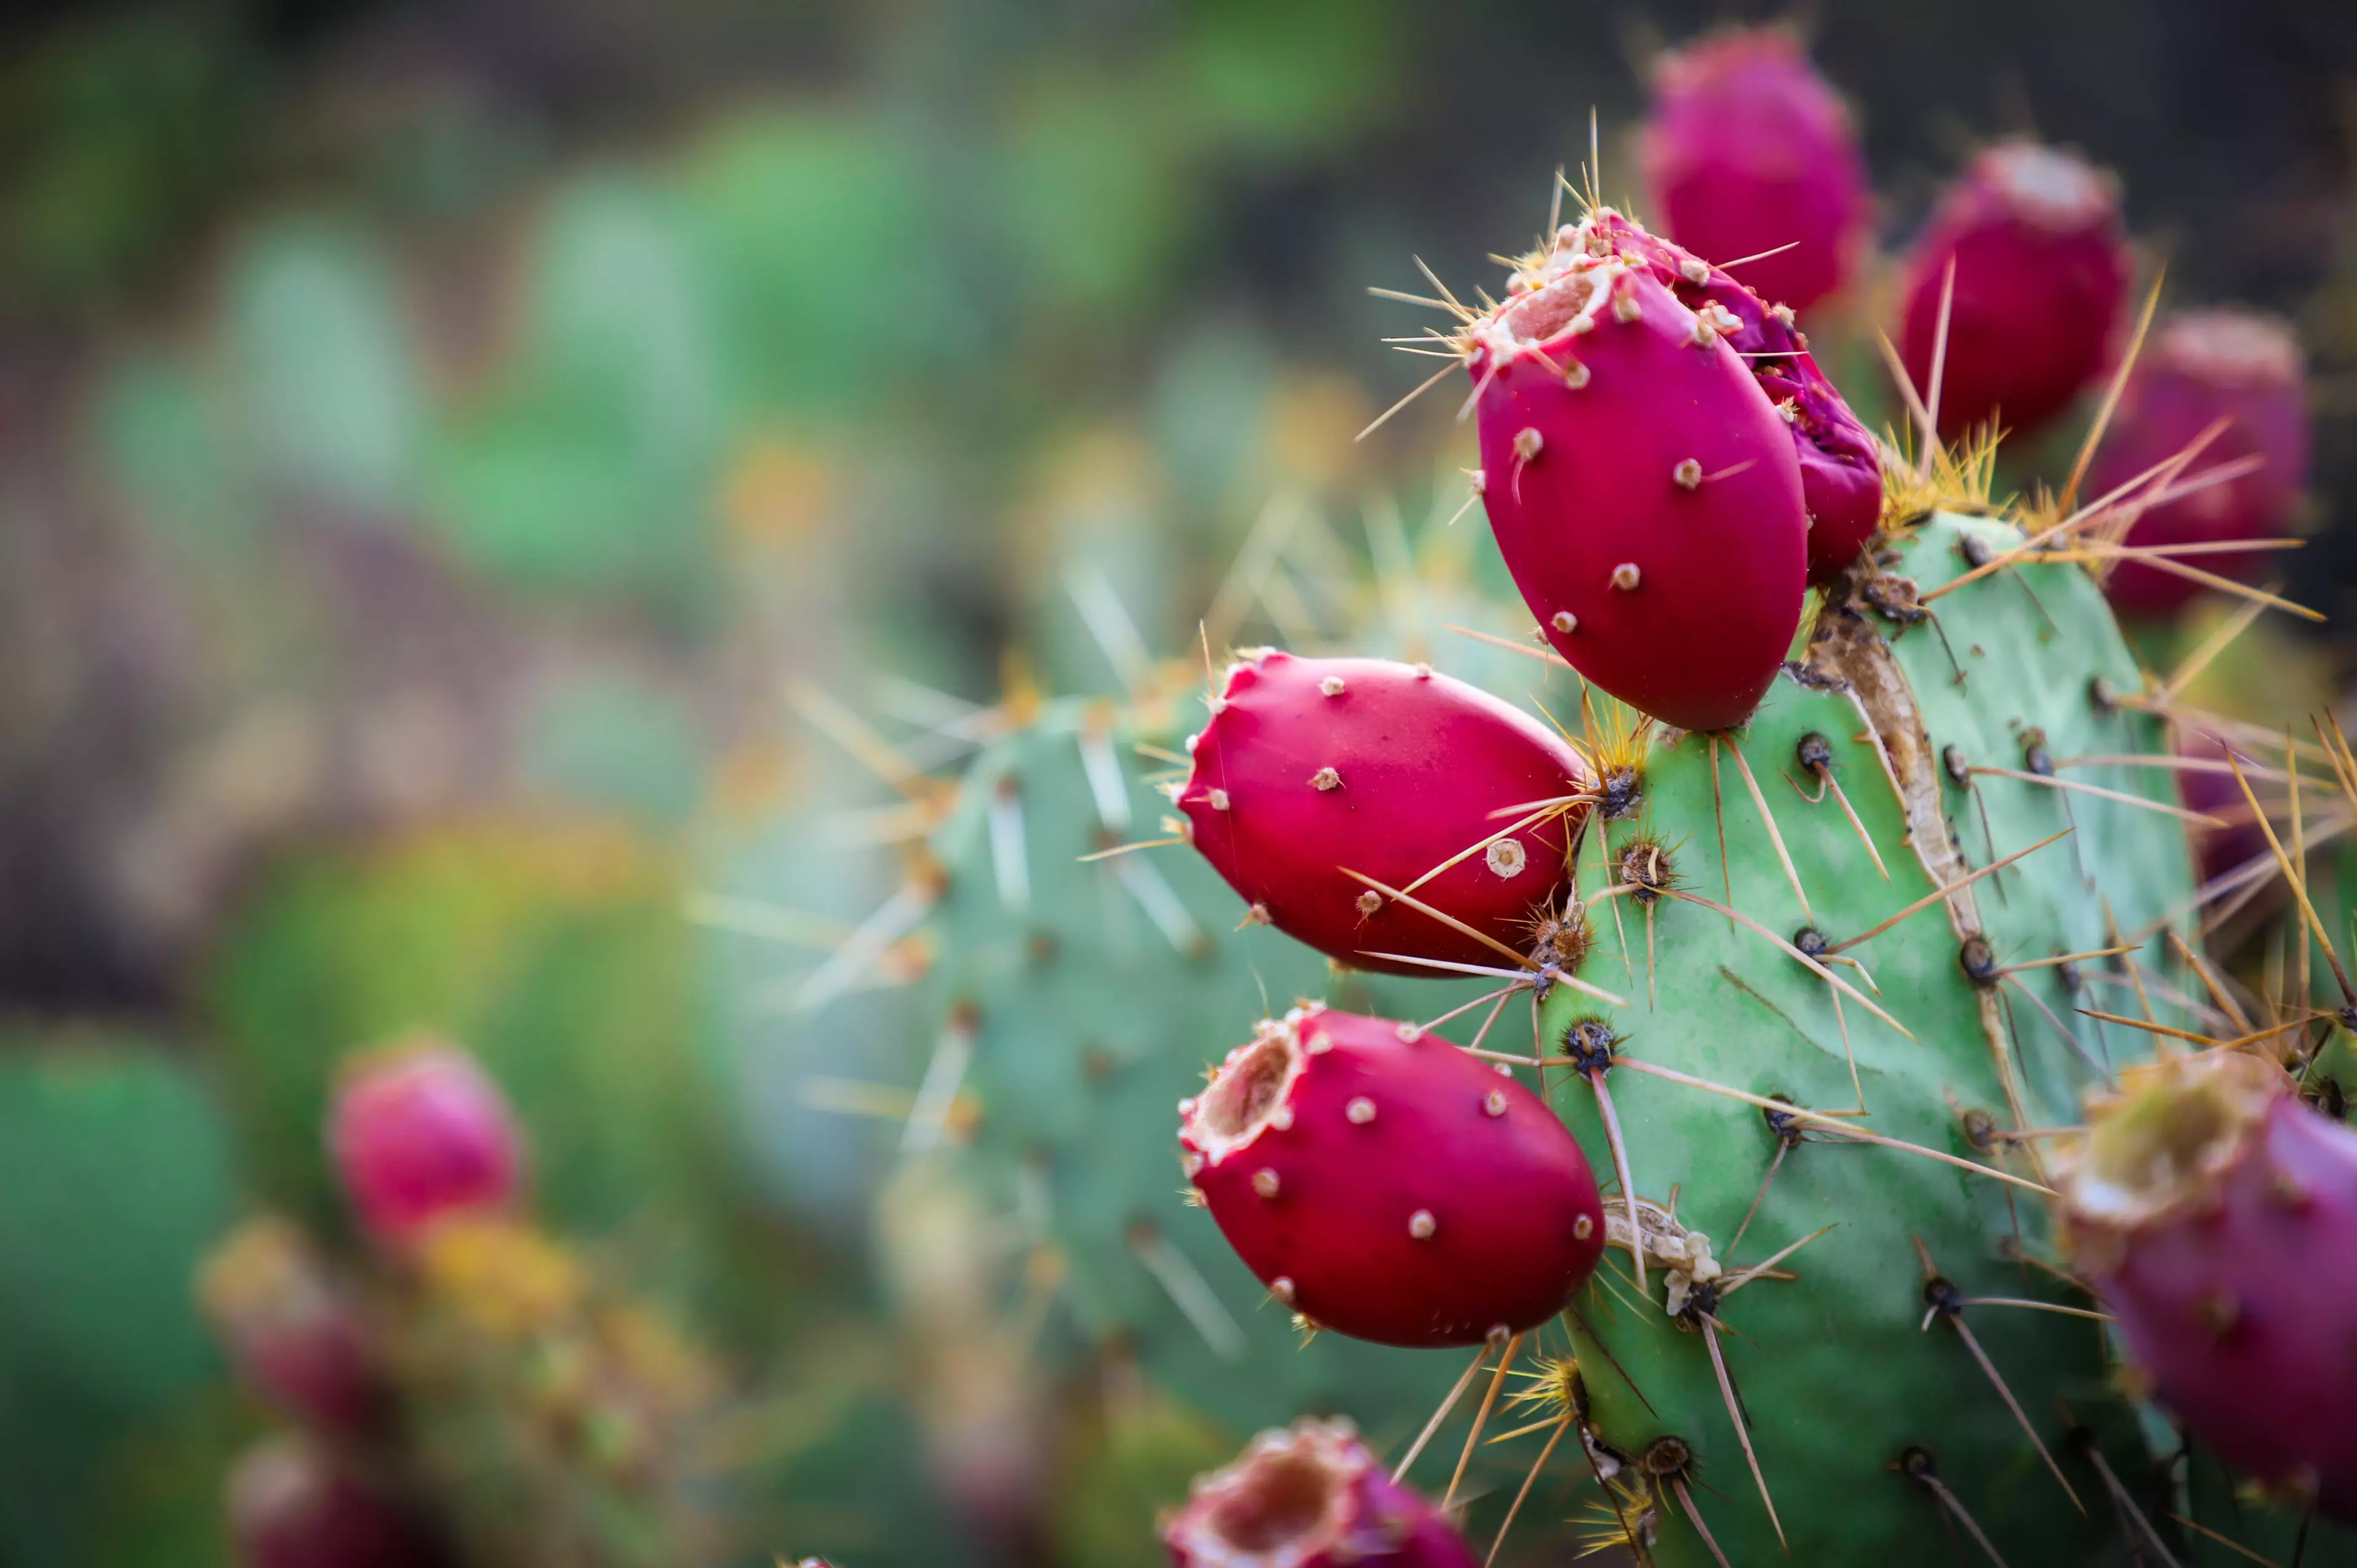 The juice drink cure is made from cherries and prickly pears, a type of cactus (